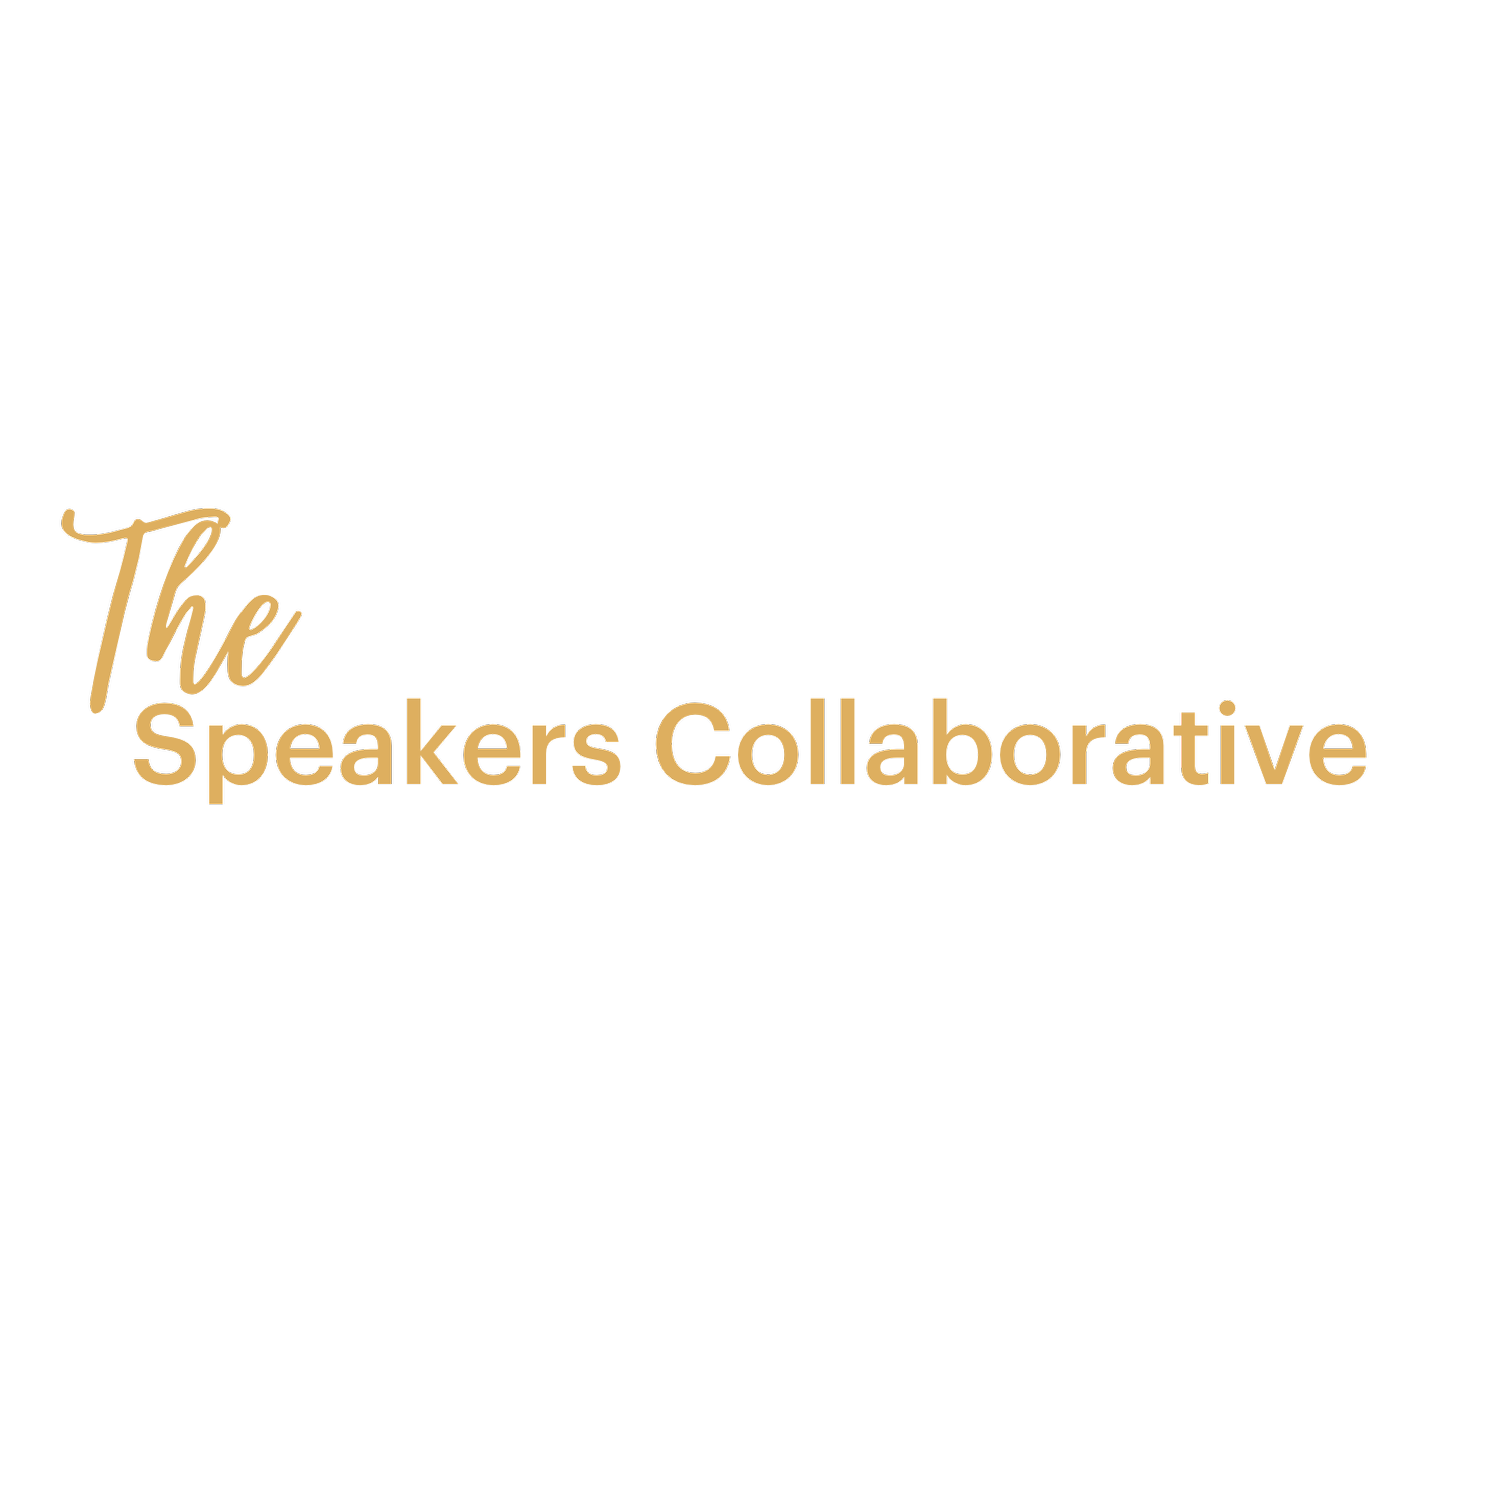 The Speakers Collaborative